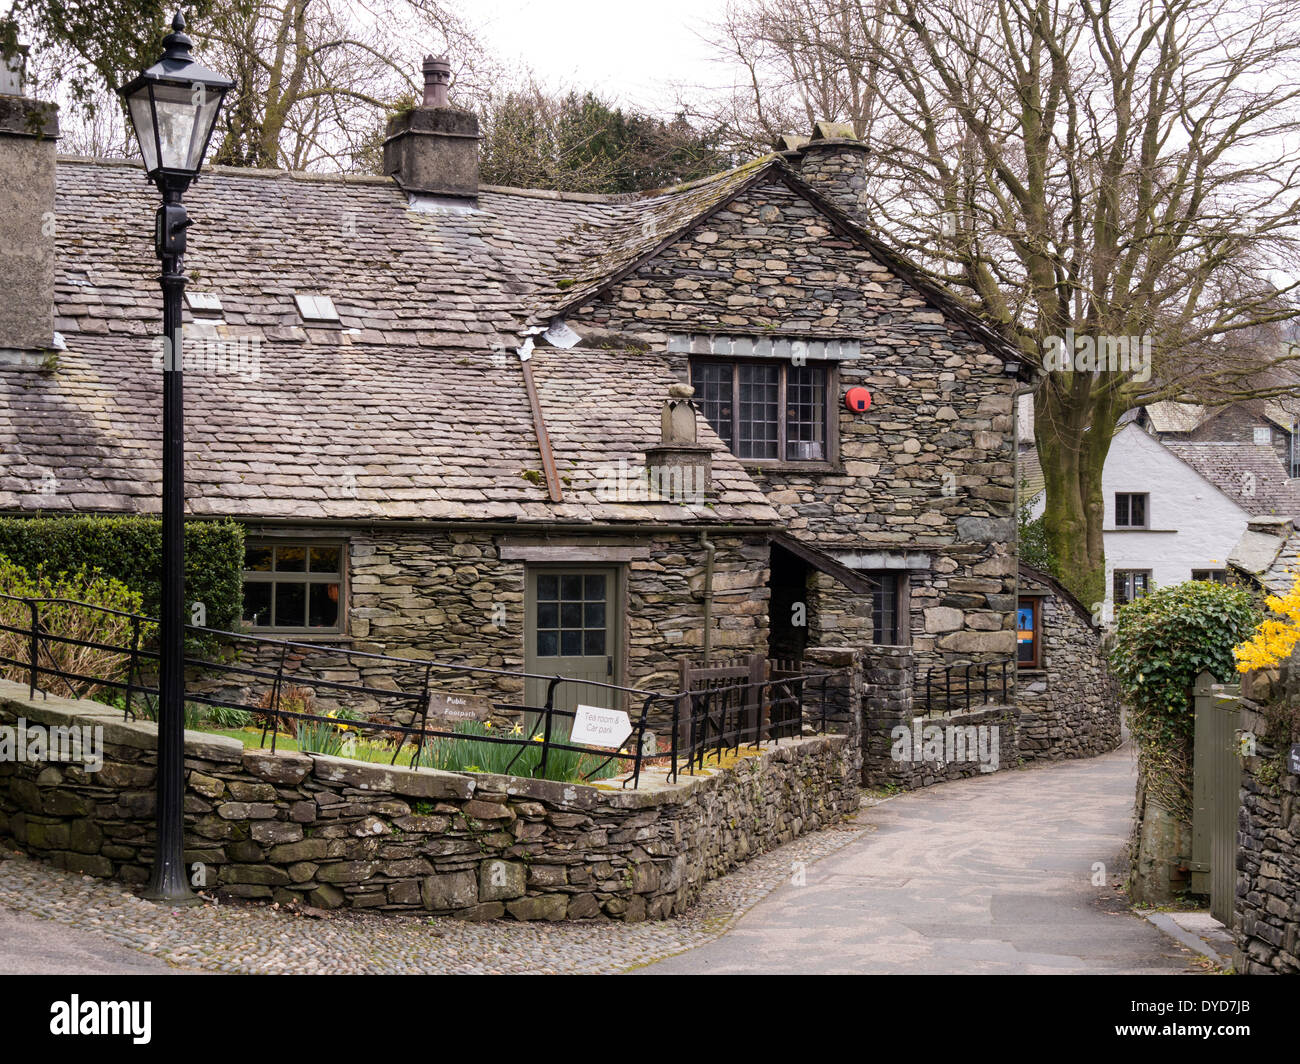 Old traditional Lakeland cottages with slate dry stone walls and roofs. Grasmere, Cumbria, England, UK Stock Photo